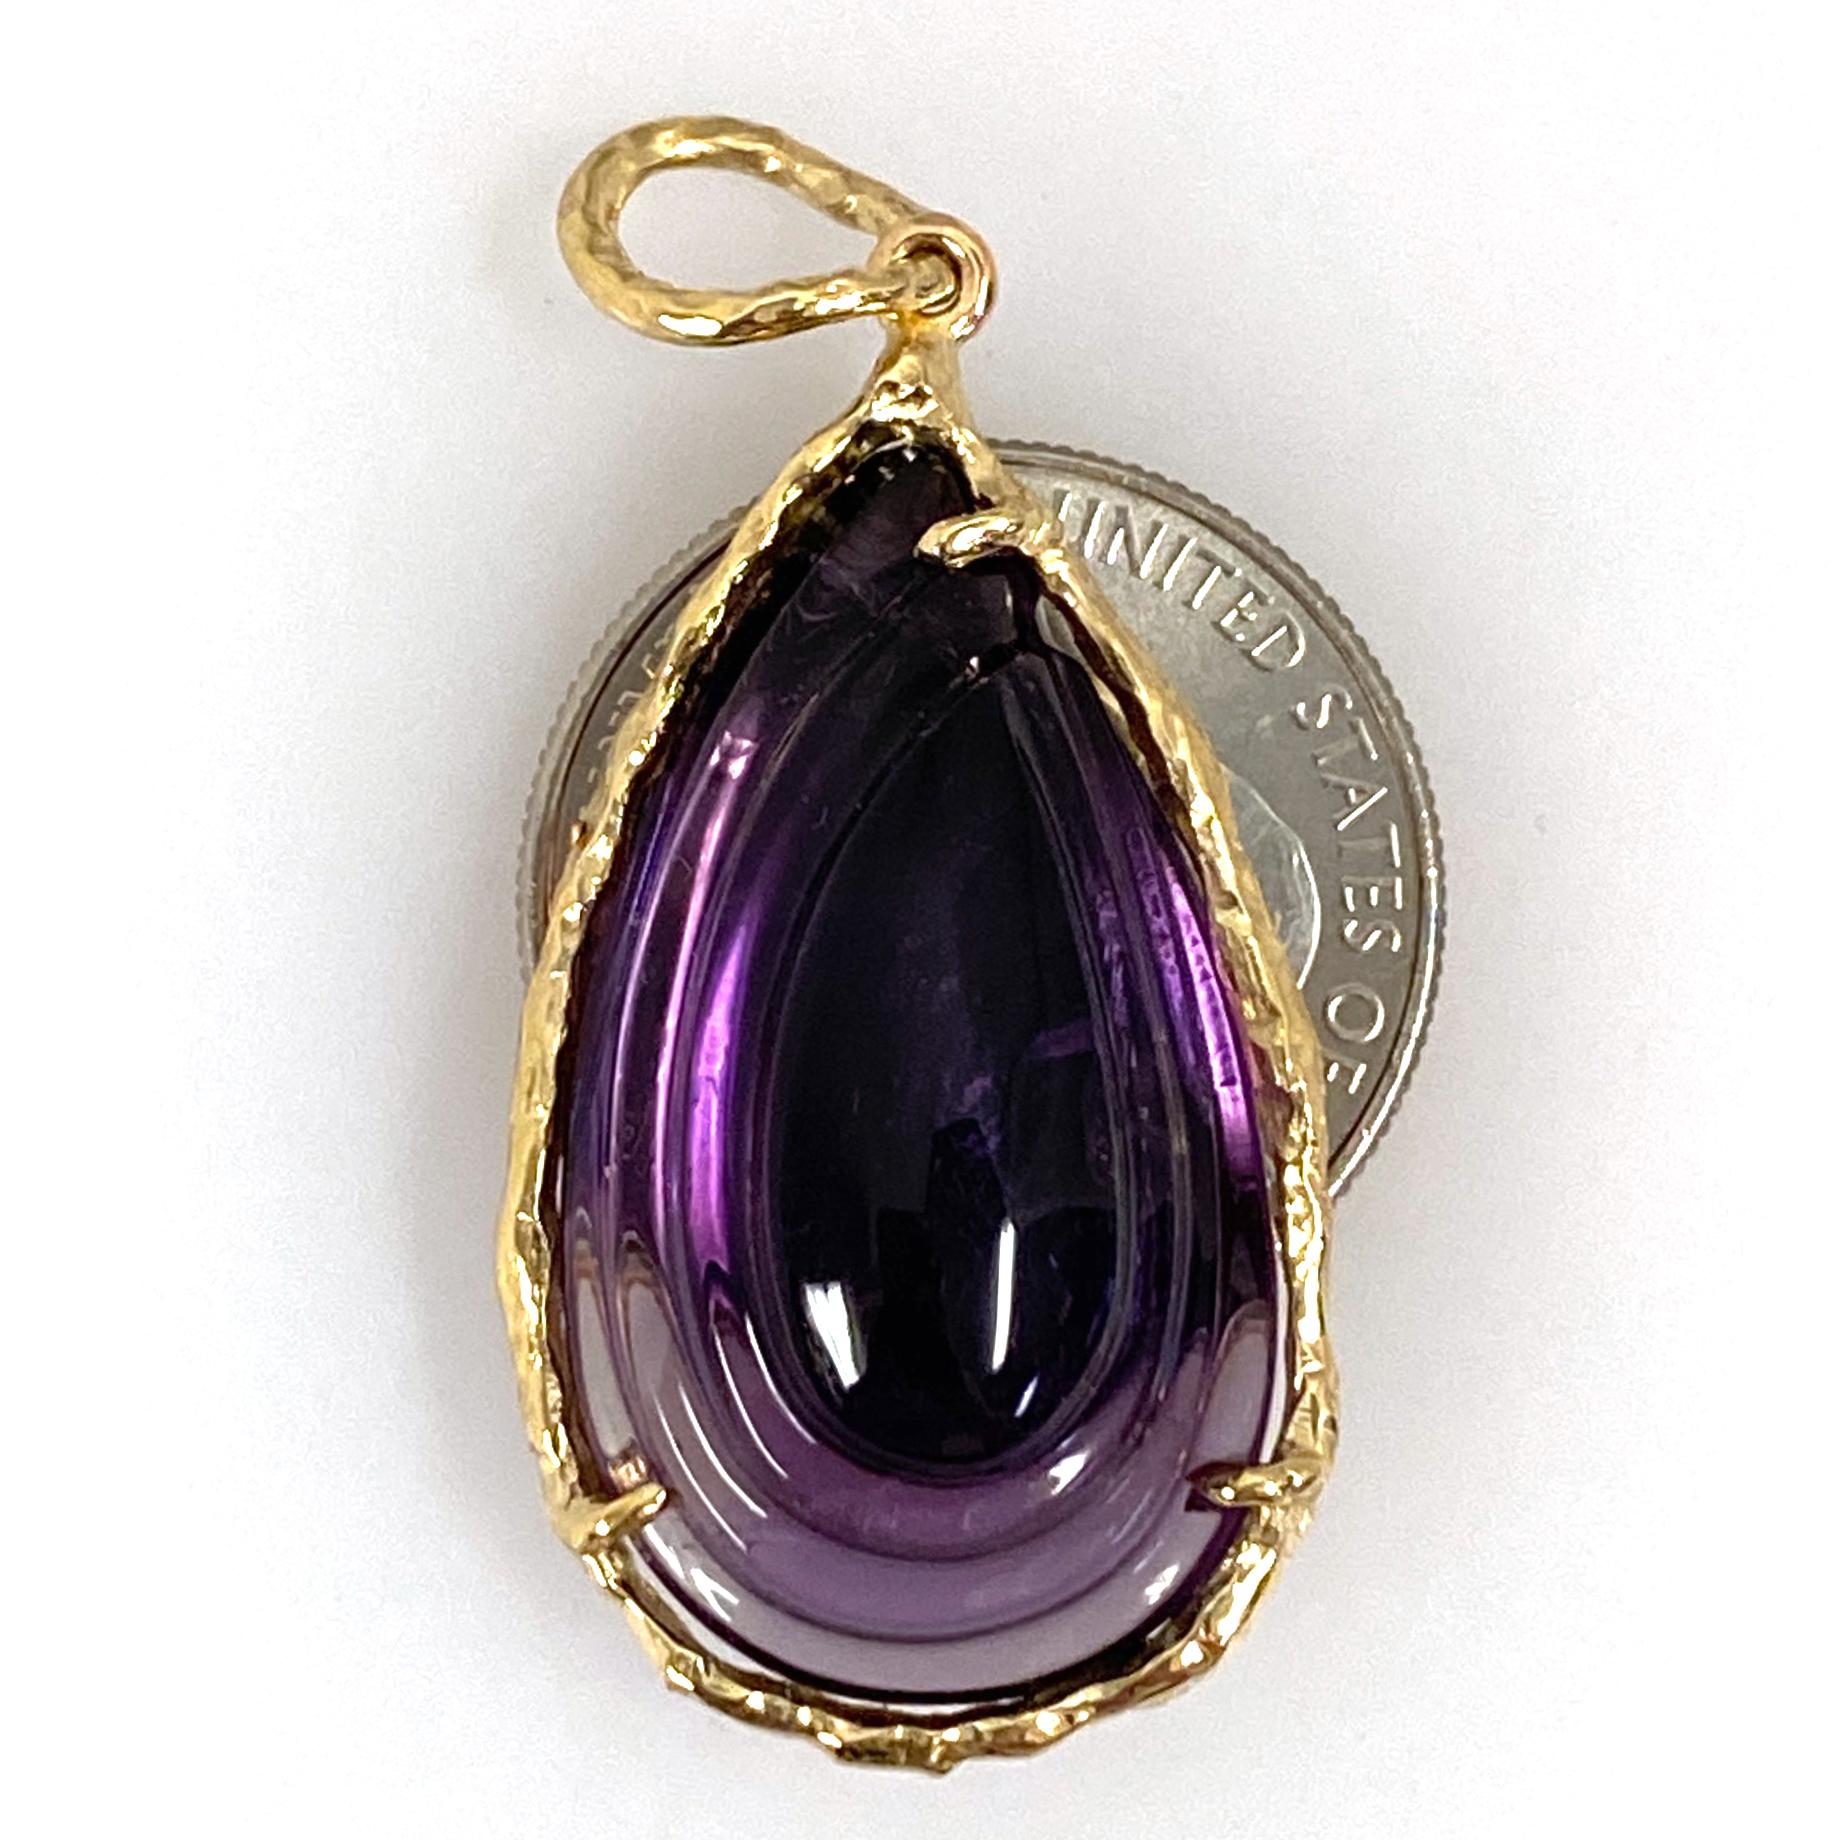 39 Carat Carved Amethyst Pendant in 18K Gold on Convertible Amethyst Bead Chain For Sale 10